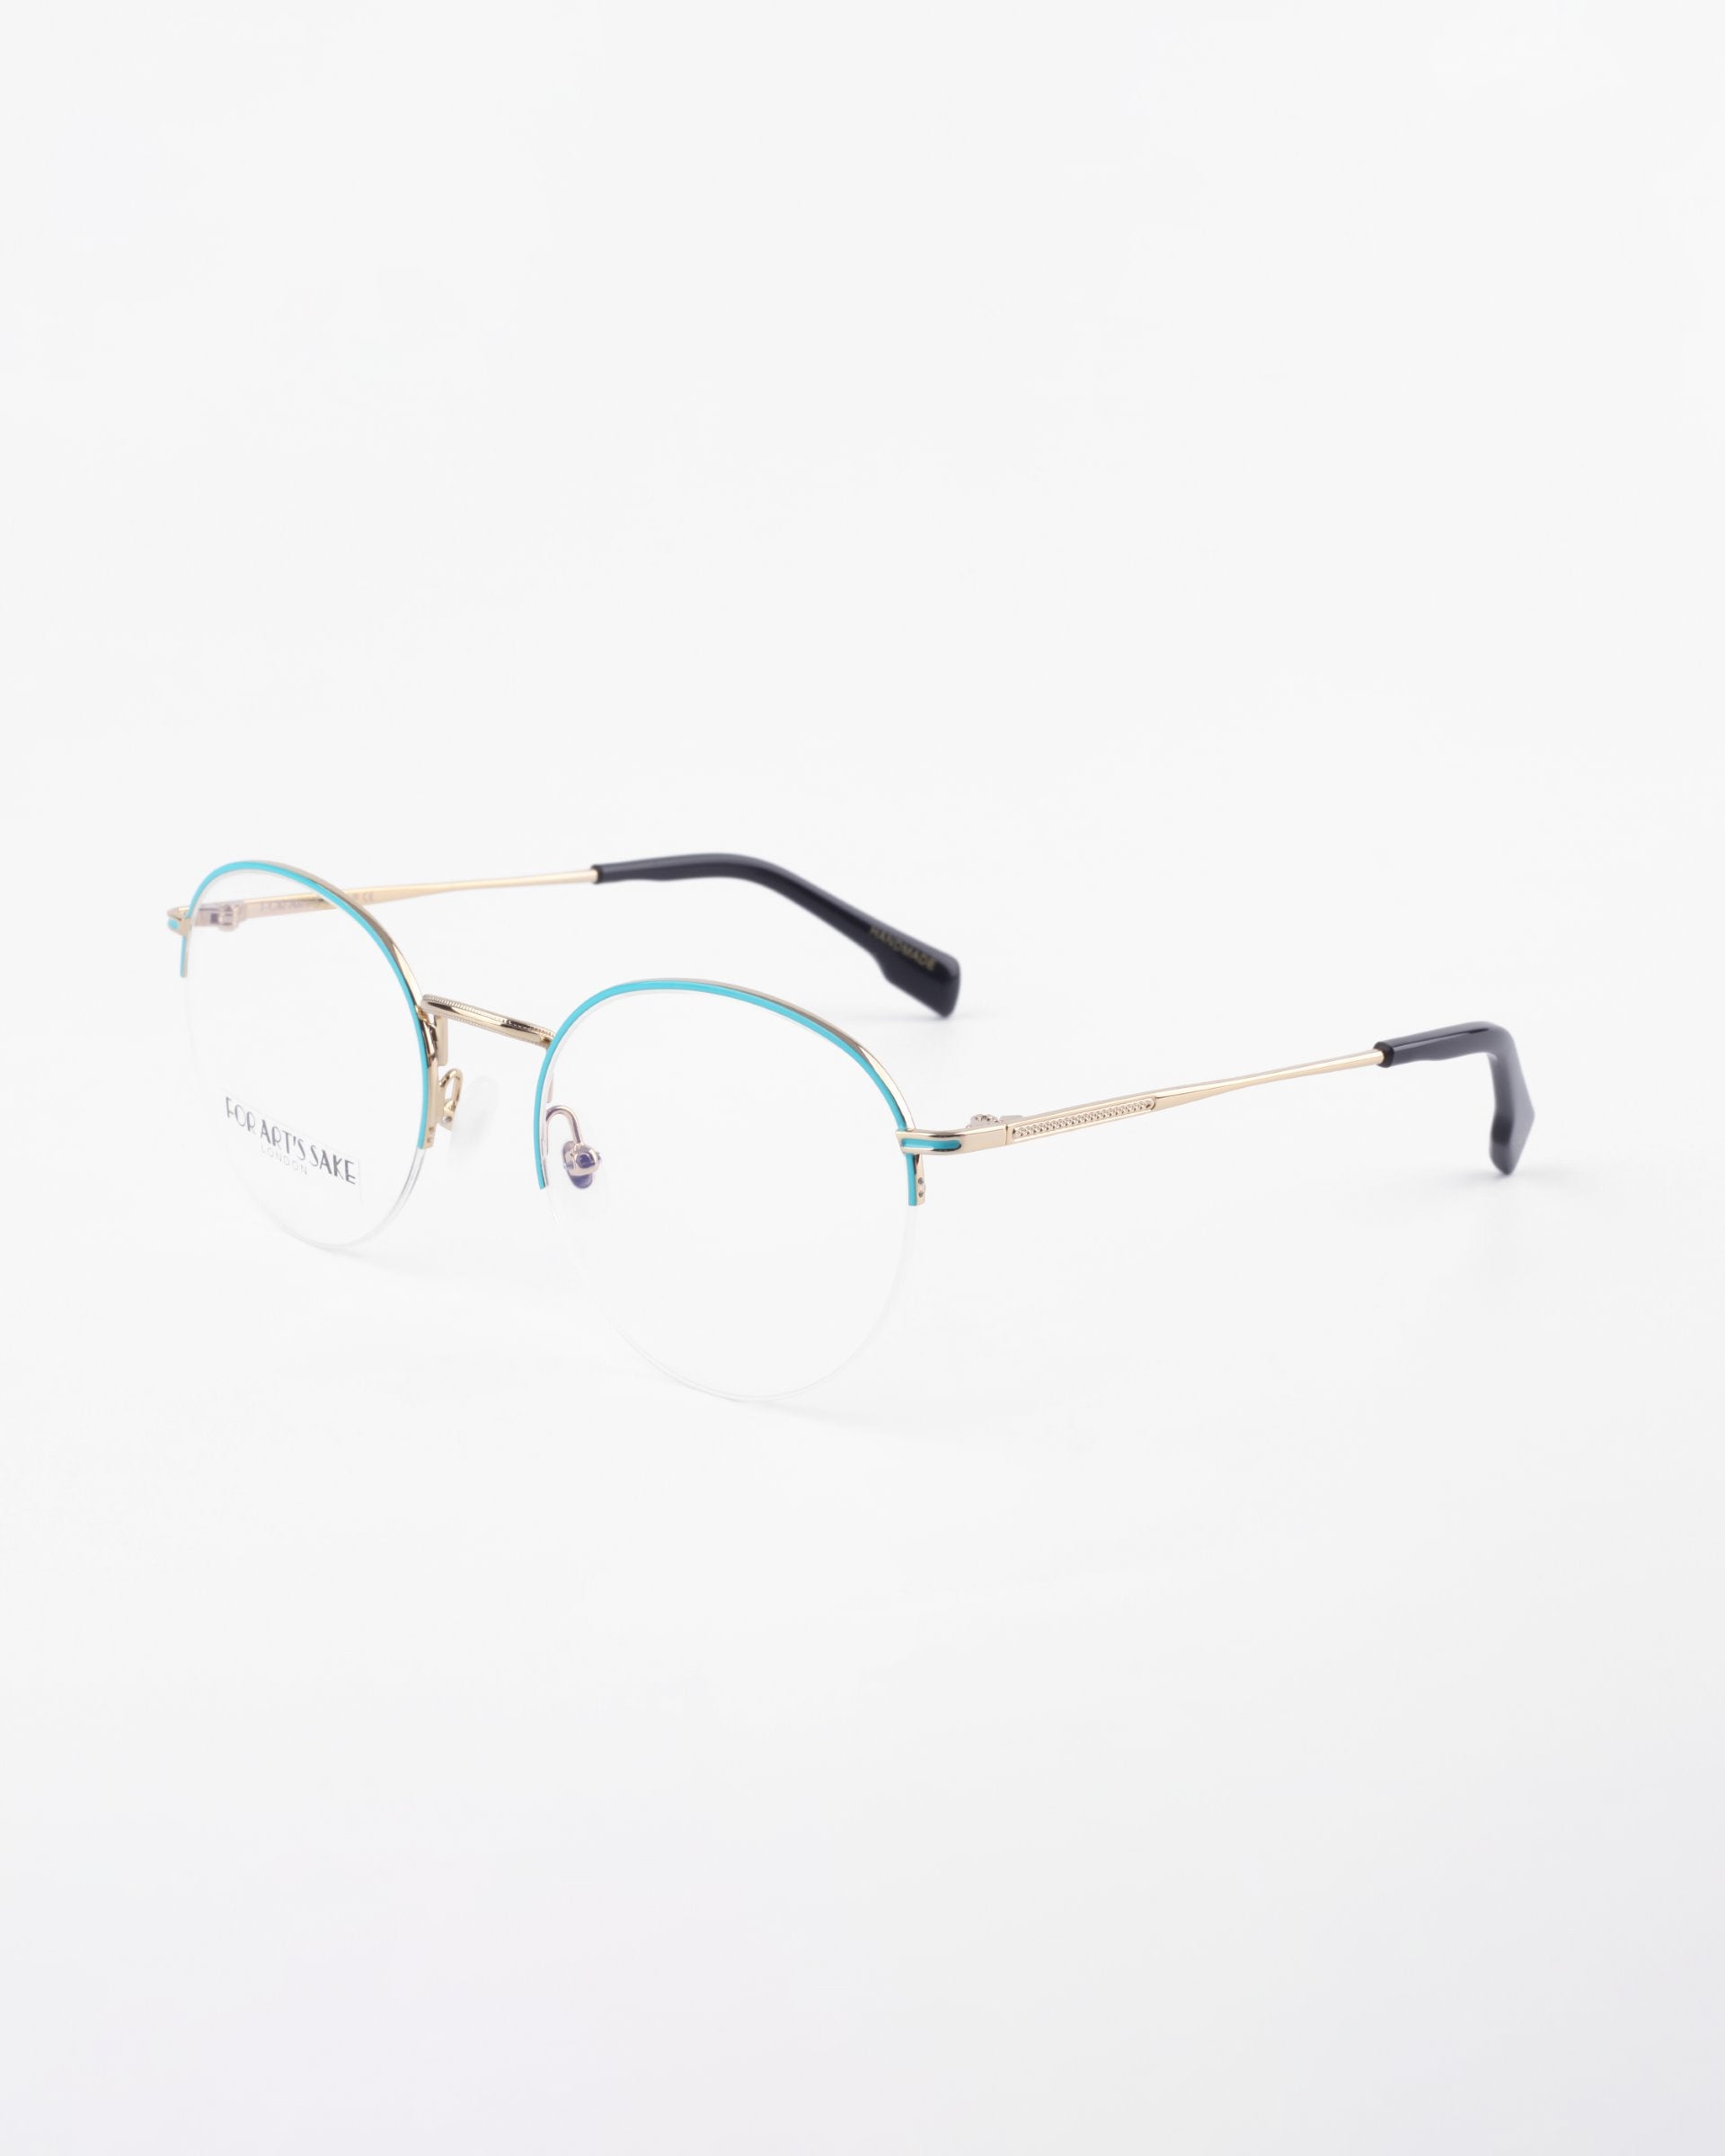 A pair of thin, gold-framed eyeglasses with rimless, prescription lenses. The temples have black plastic tips, and there is a subtle touch of blue on the upper part of the lenses for a blue light filter. The For Art&#39;s Sake® Ivy glasses are displayed on a white background.